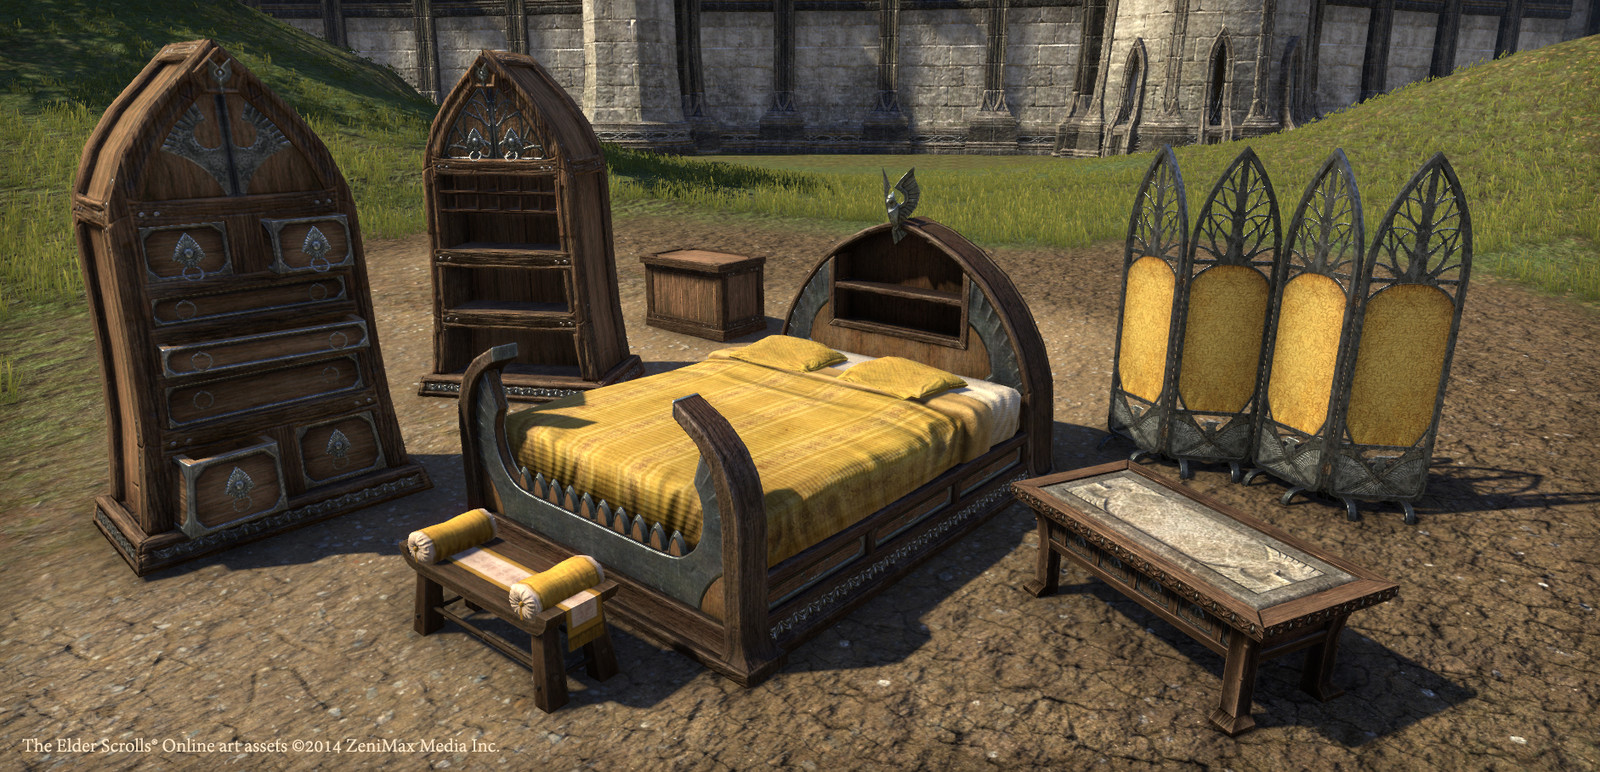 Altmer furniture. Ground texture and background by others.